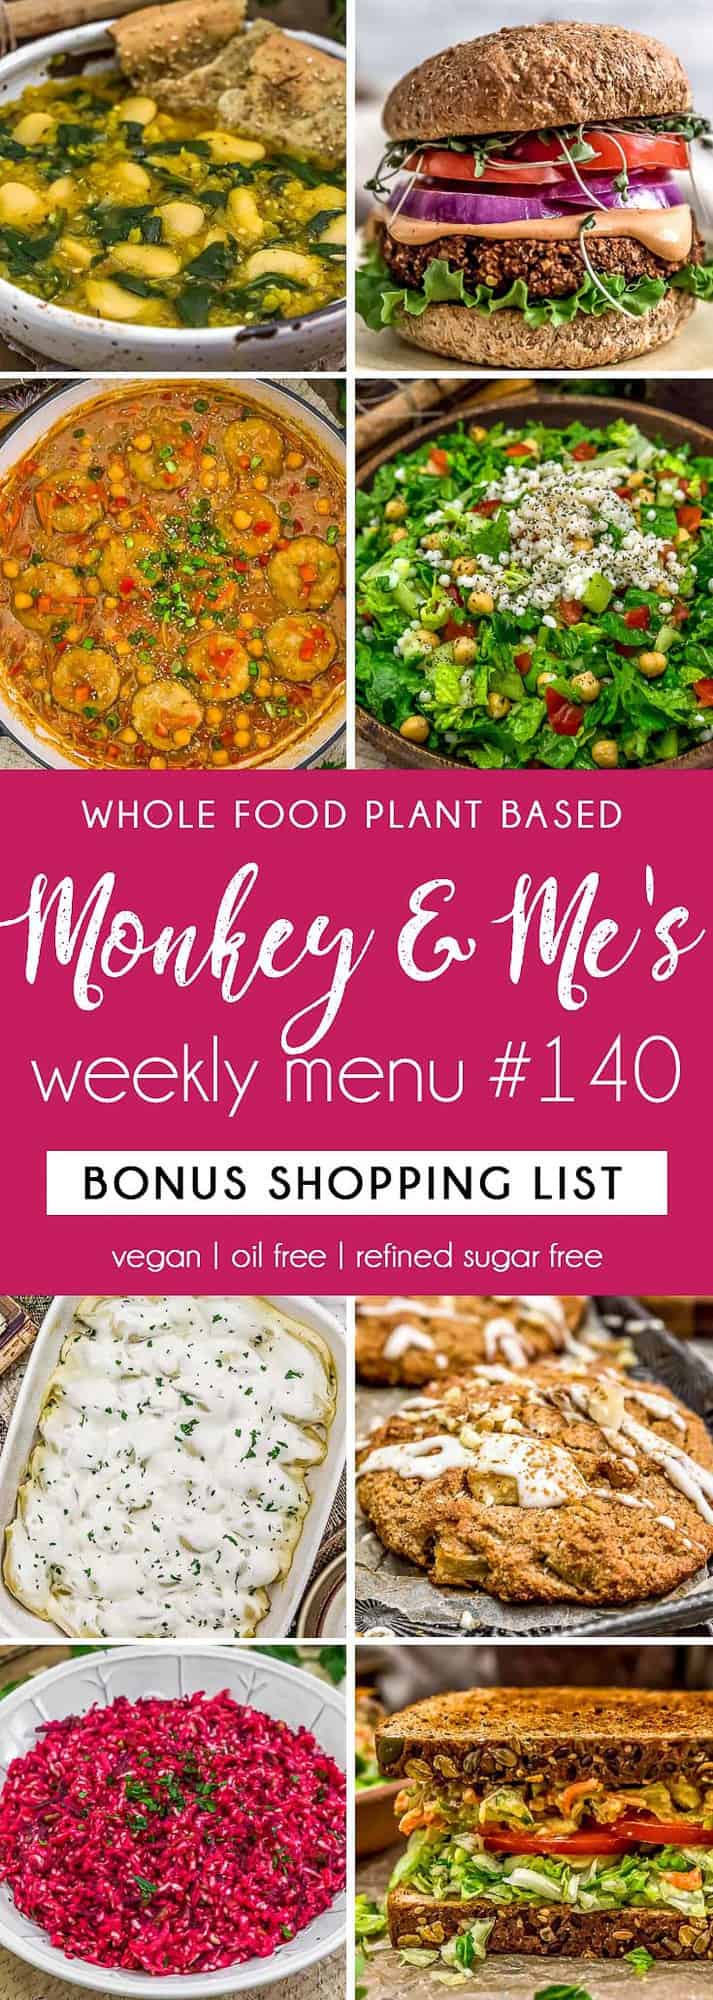 Monkey and Me's Menu 140 featuring 8 recipes